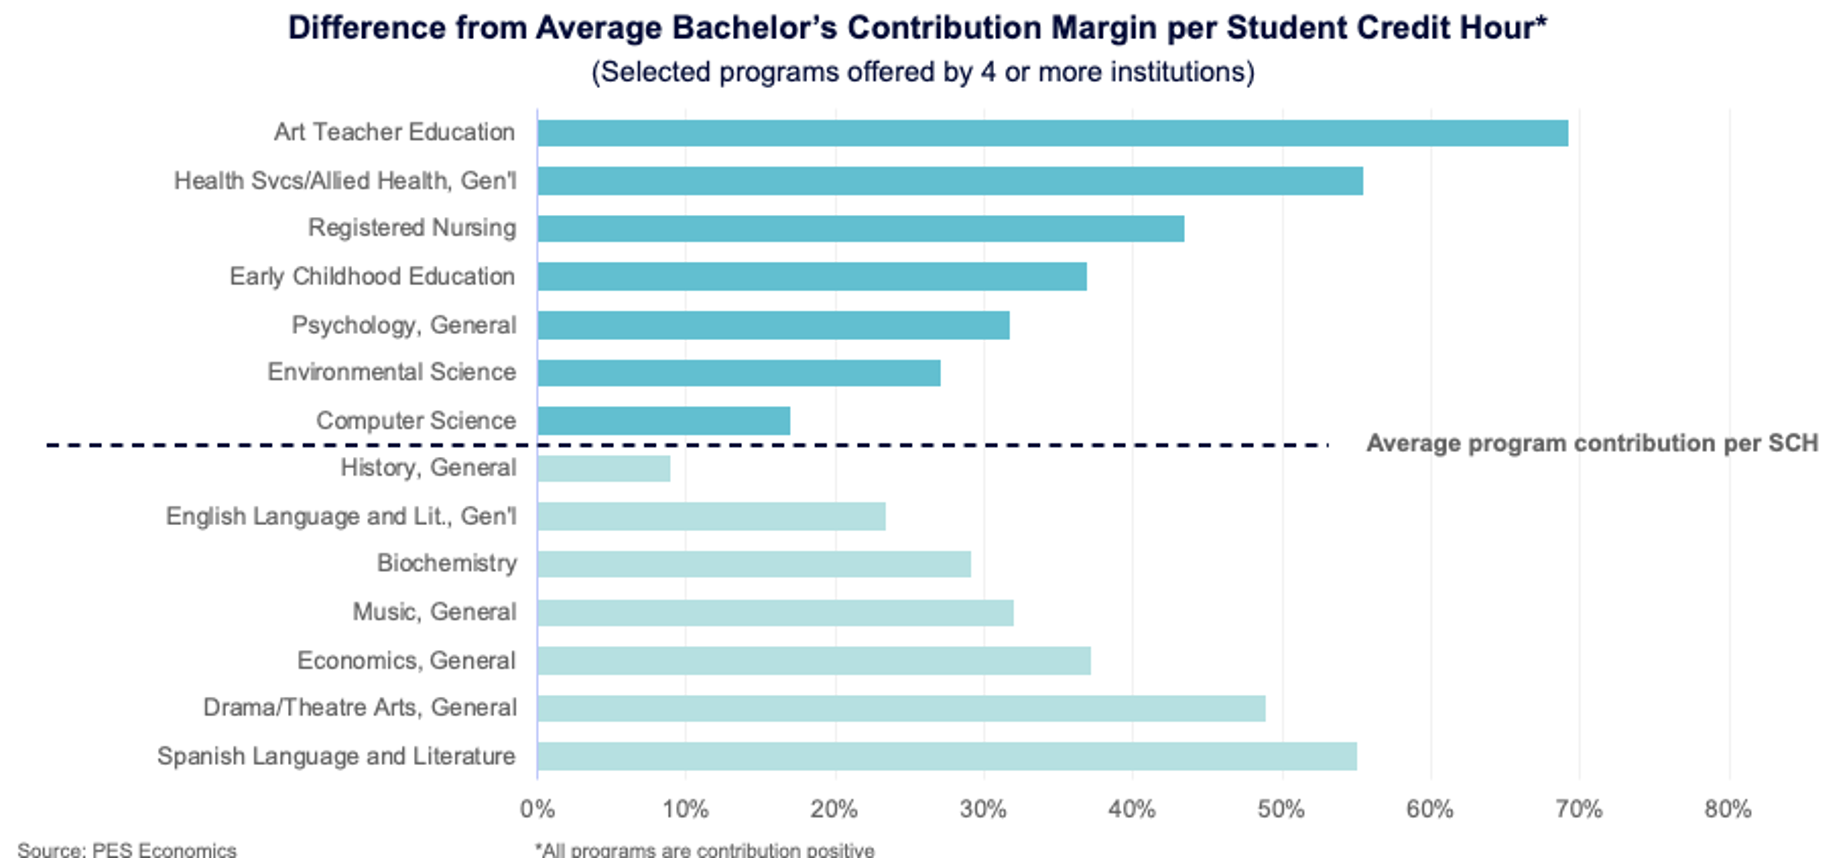 Difference from Average Bachelor's Contribution Margin per Student Credit Hour